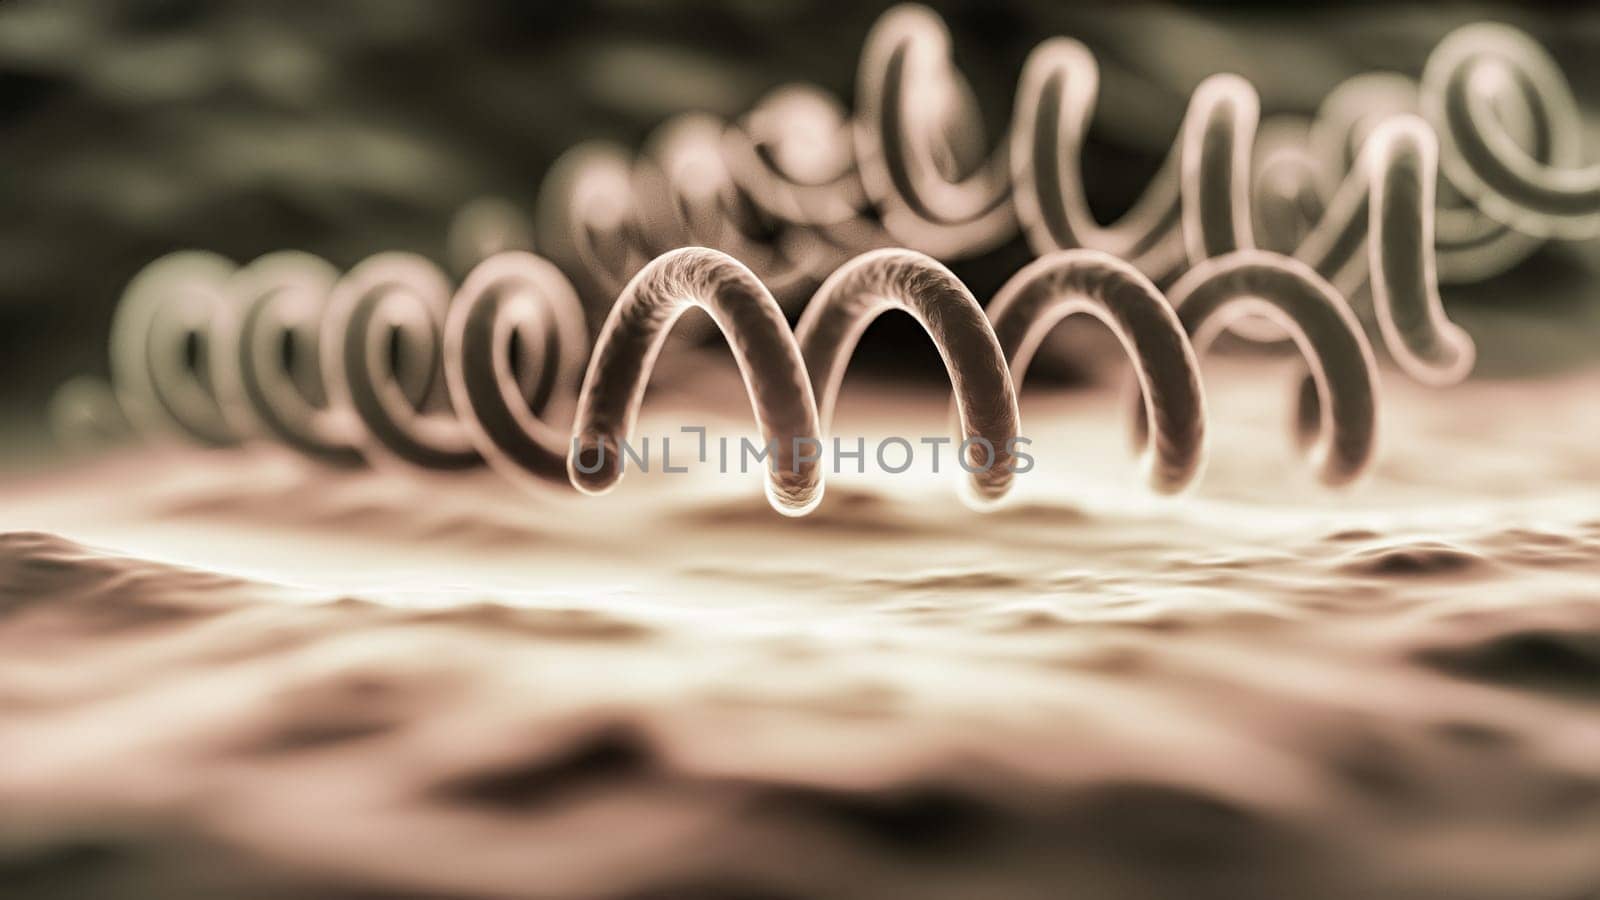 Treponema pallidum bacterium, highlighted by detailed textures that emphasize its spiral form. Showcasing the bacteriums interaction with its environment.